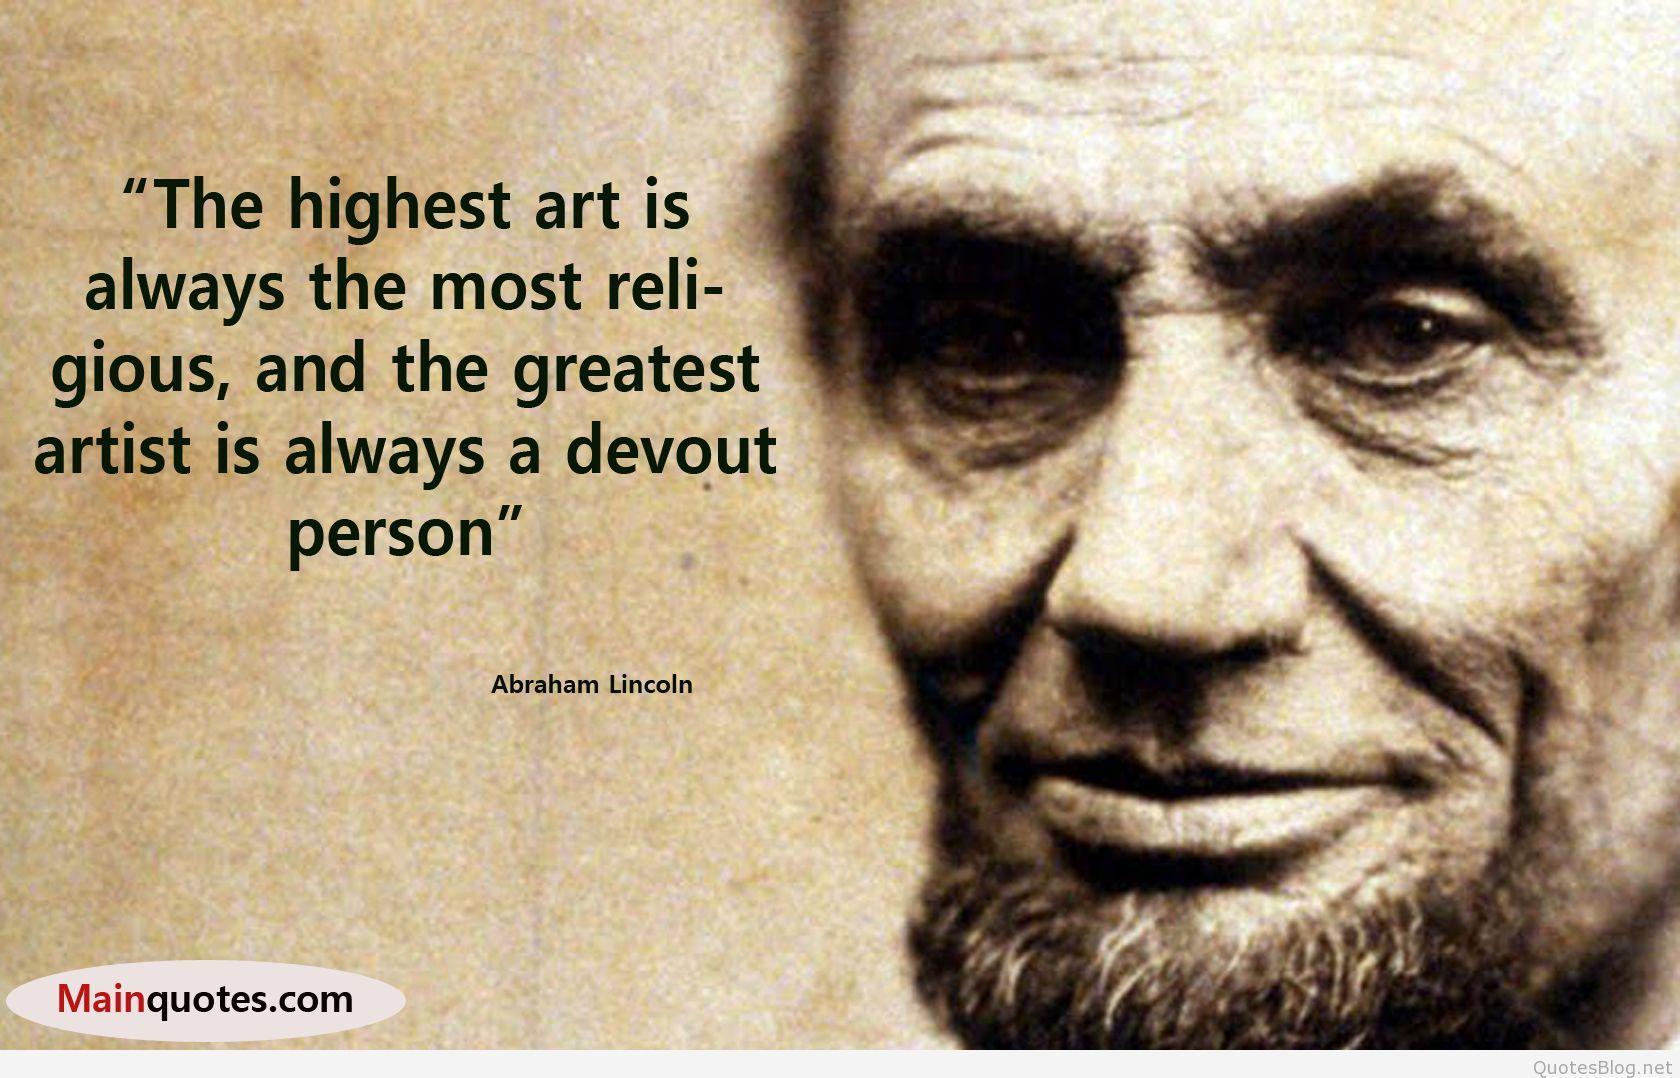 Quotes: Best Inspirational Abraham Lincoln quotes